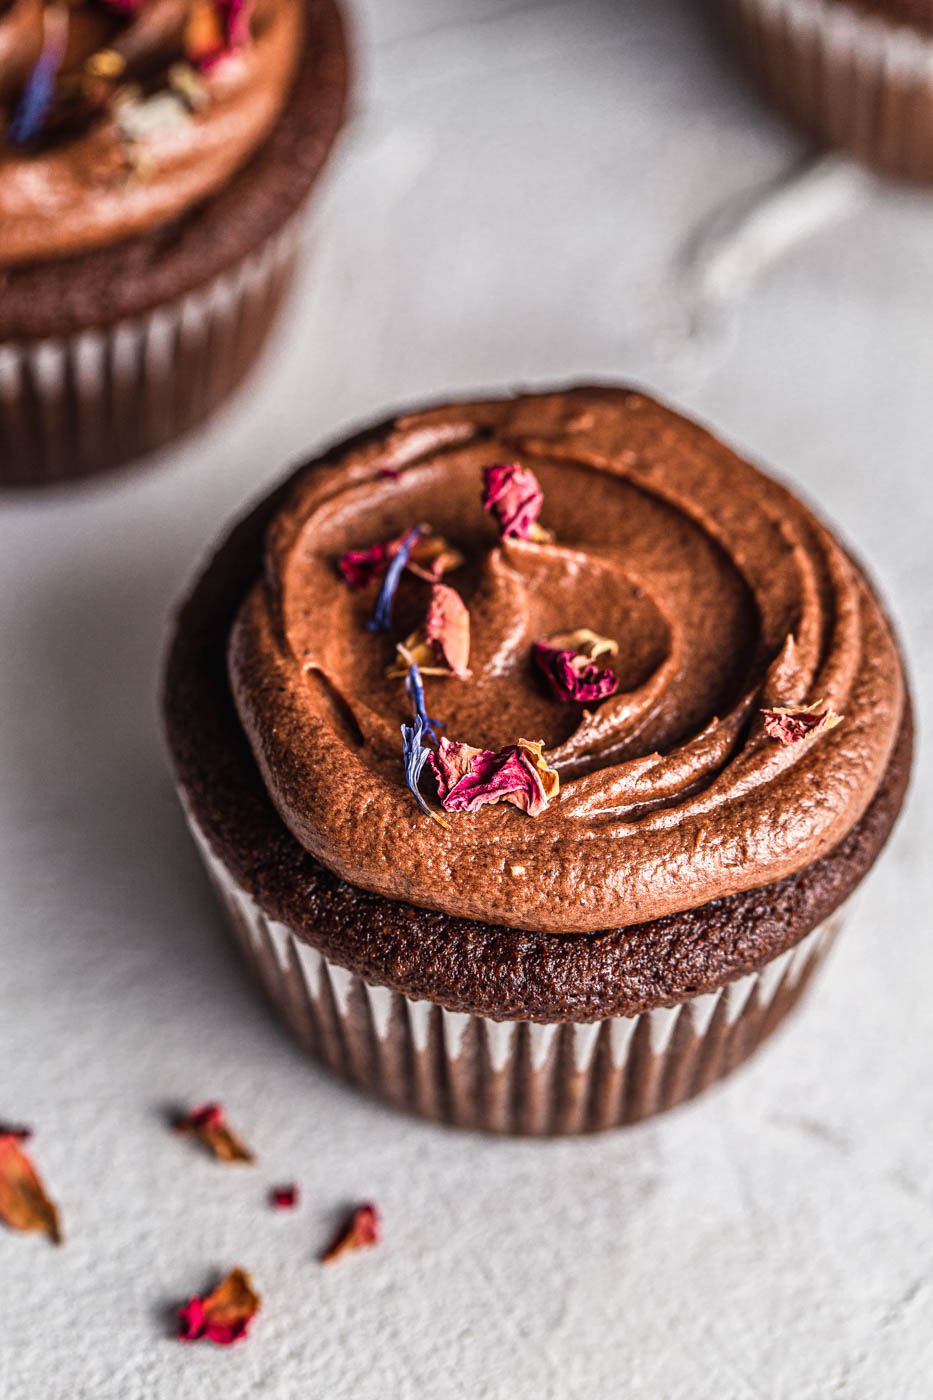 Keto Chocolate Cupcakes with shiny chocolate frosting with rose petals